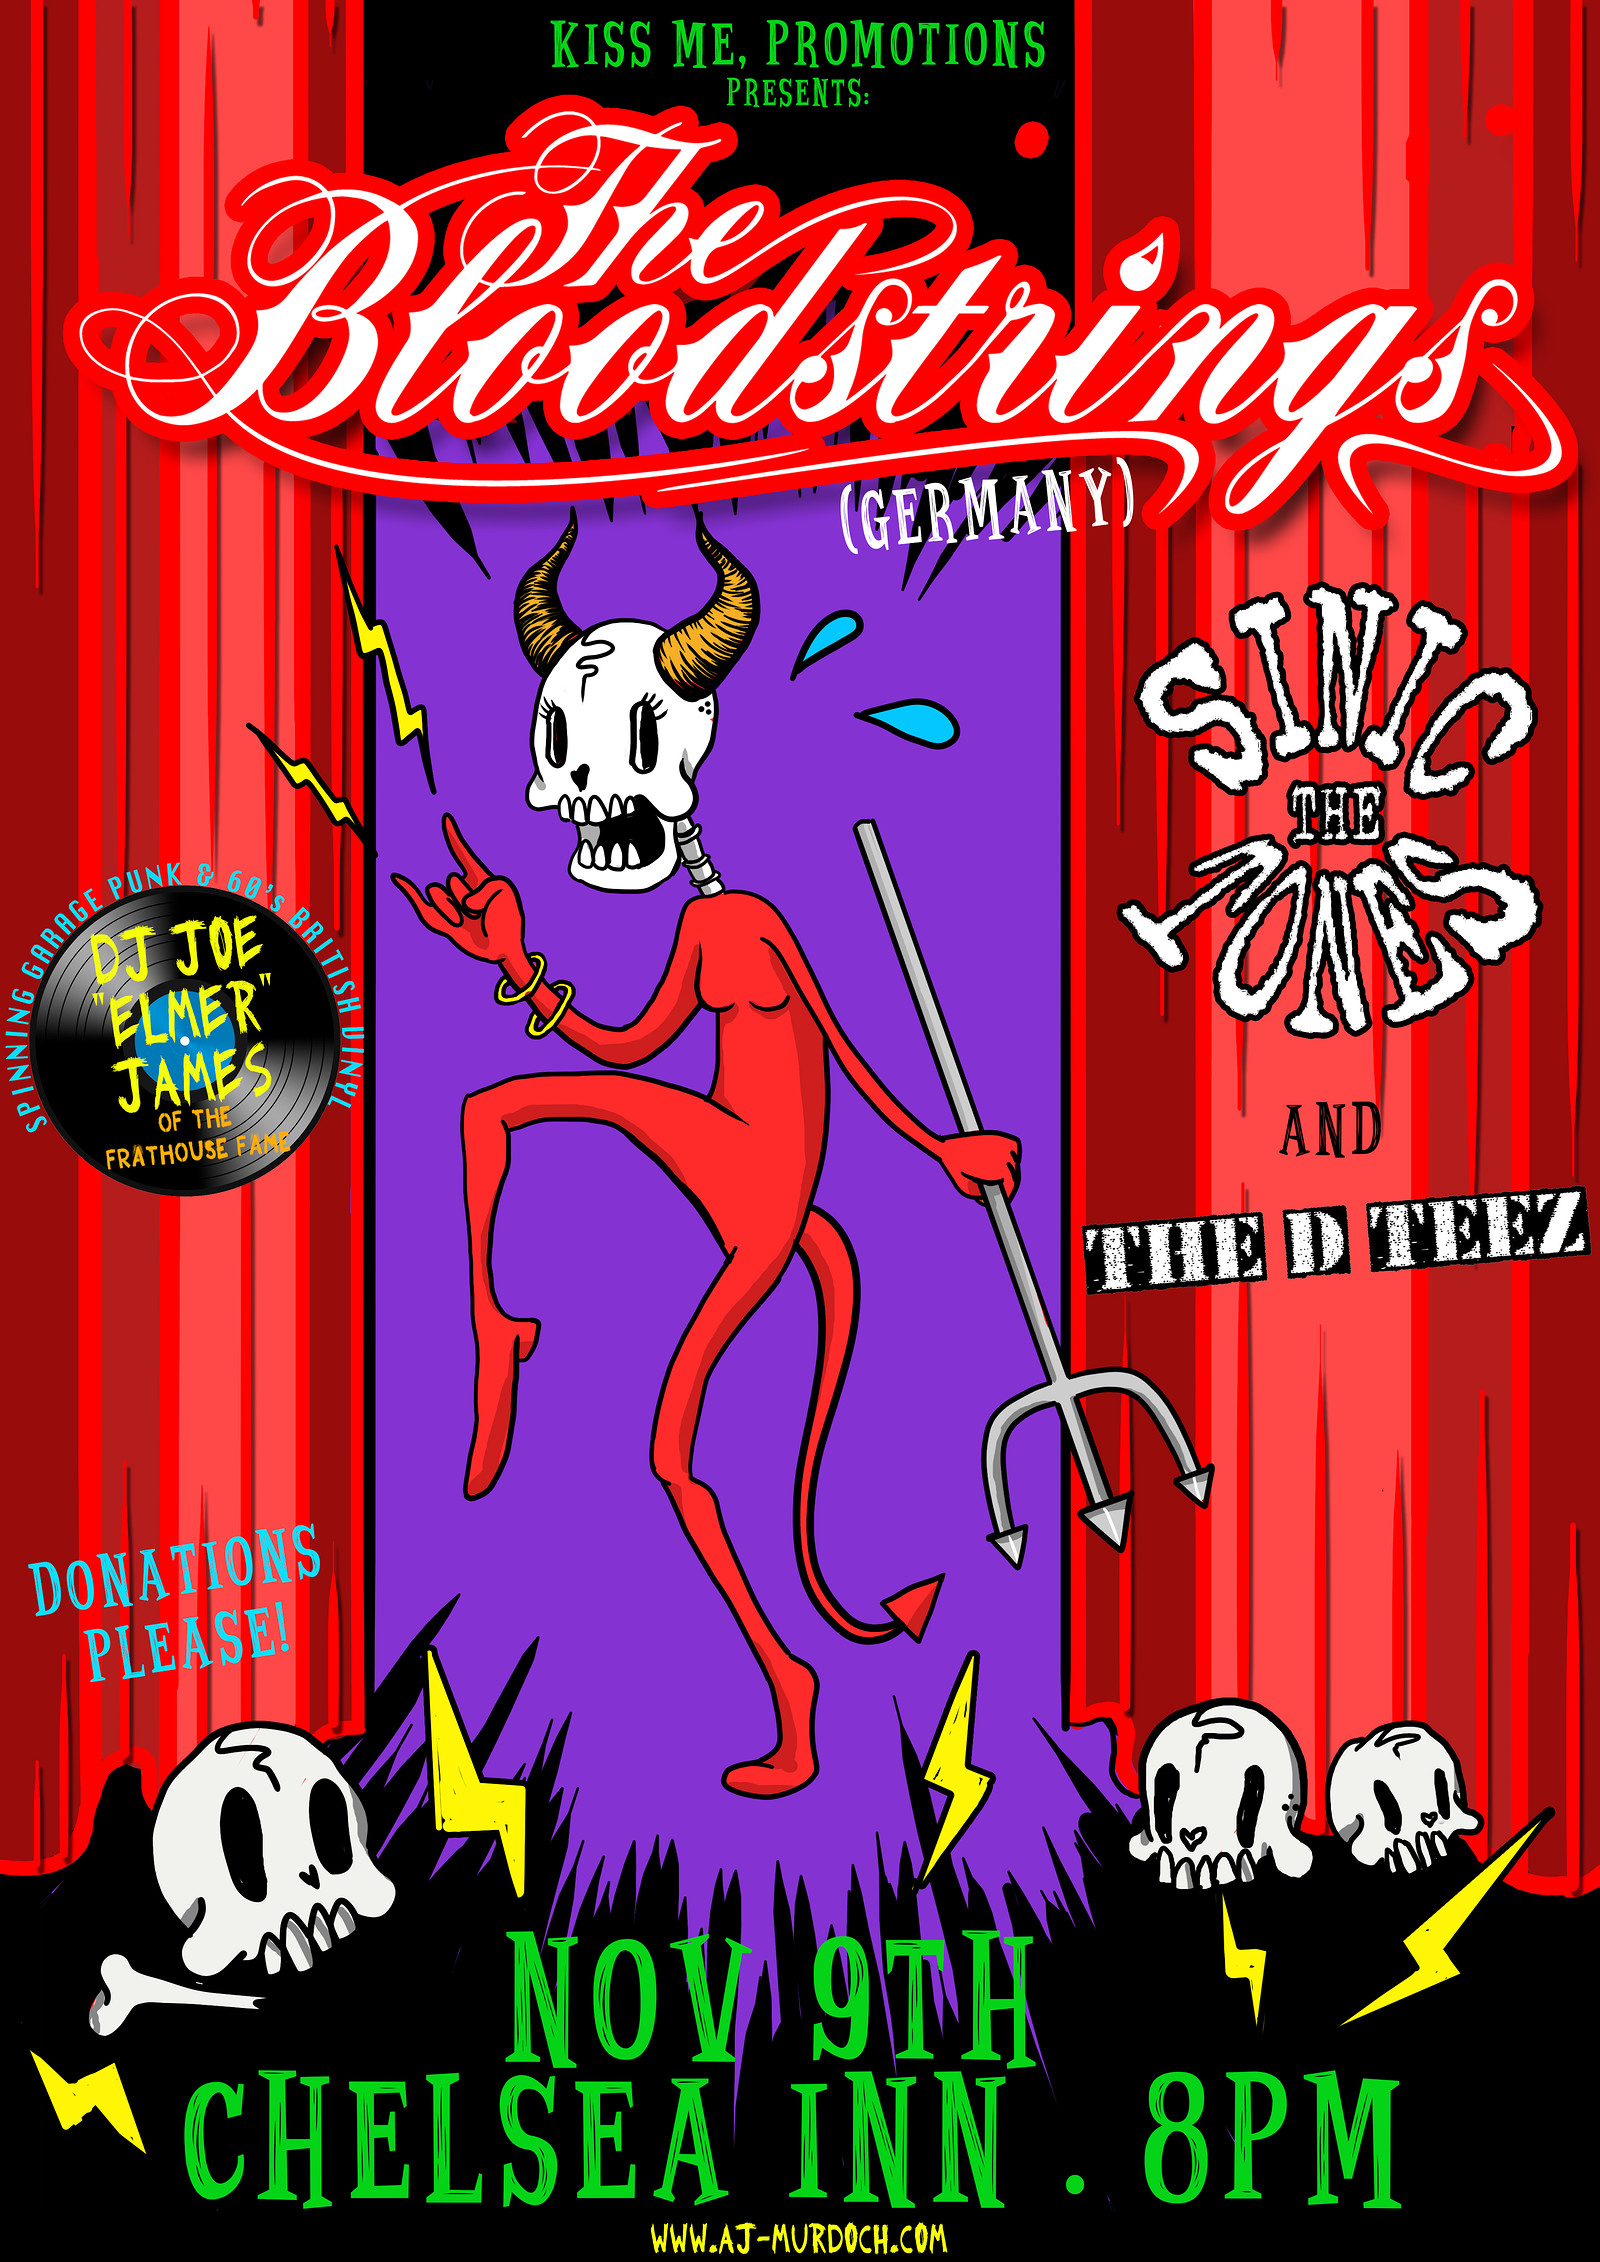 The Bloodstrings // The SinicTones // The D Teez at The Chelsea Inn